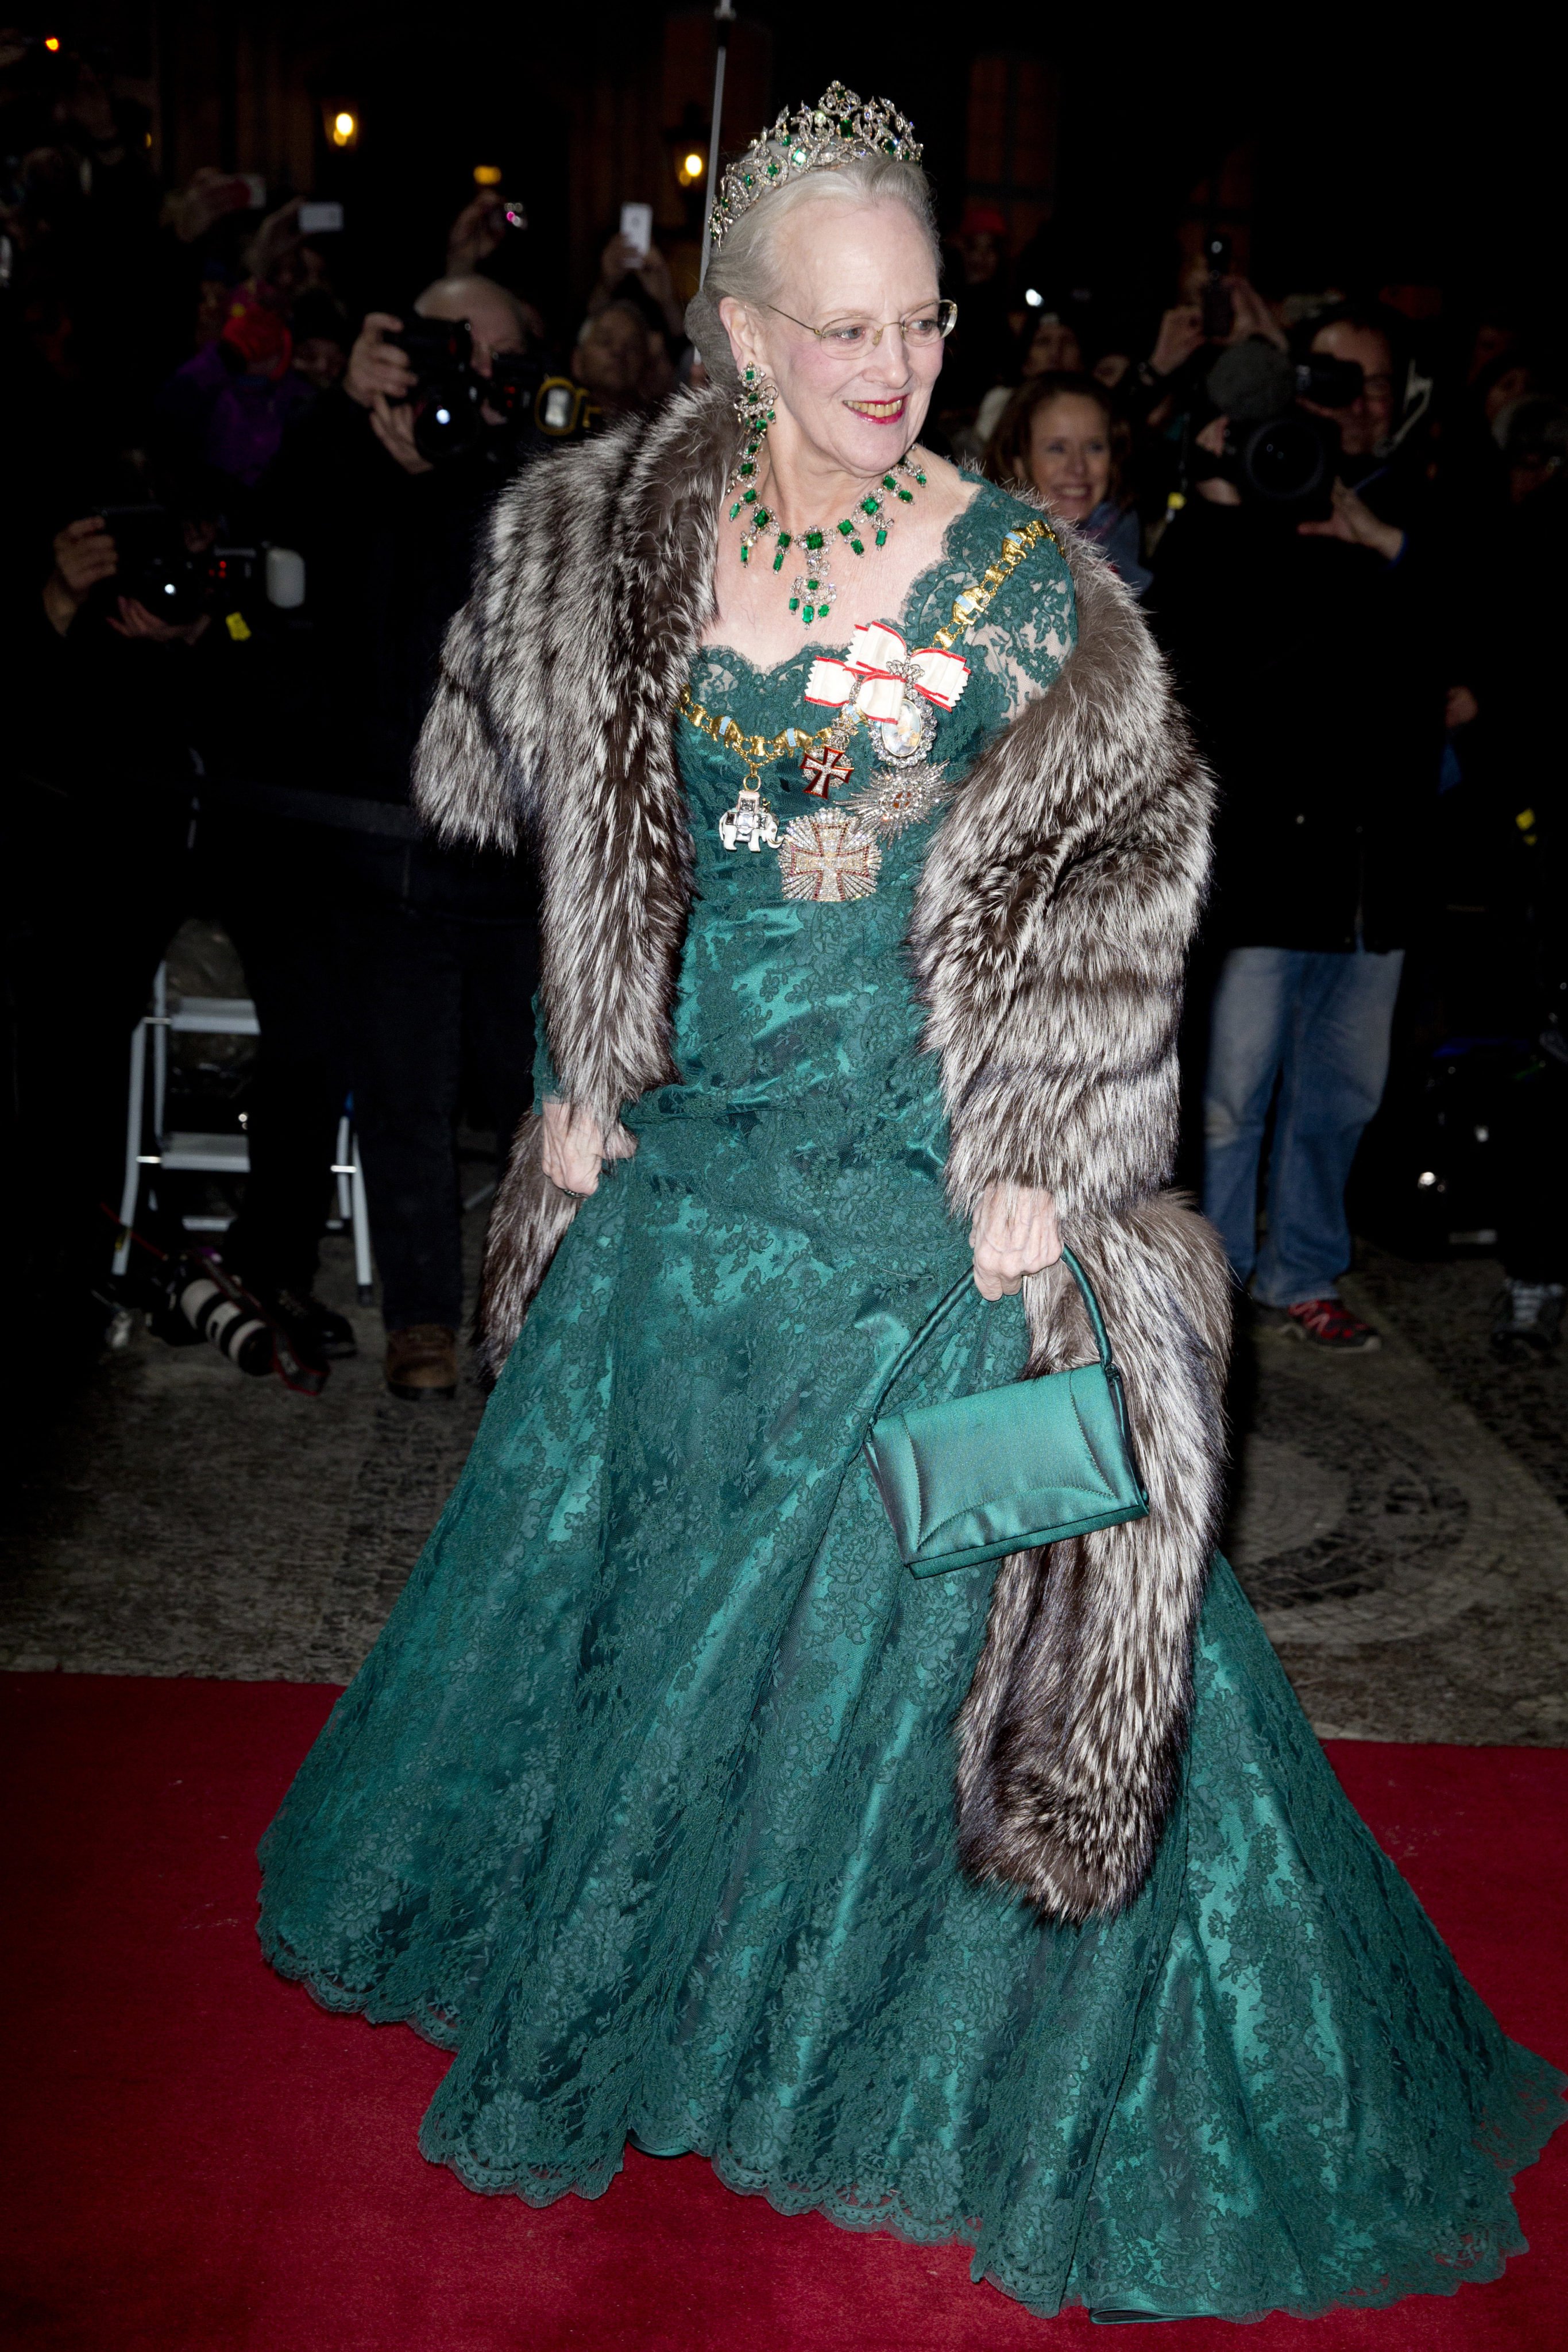 Queen Margrethe of Denmark knows how to make an entrance, matching her dresses to pieces from one of the world’s most stunning royal jewellery collections. Photo: Getty Images